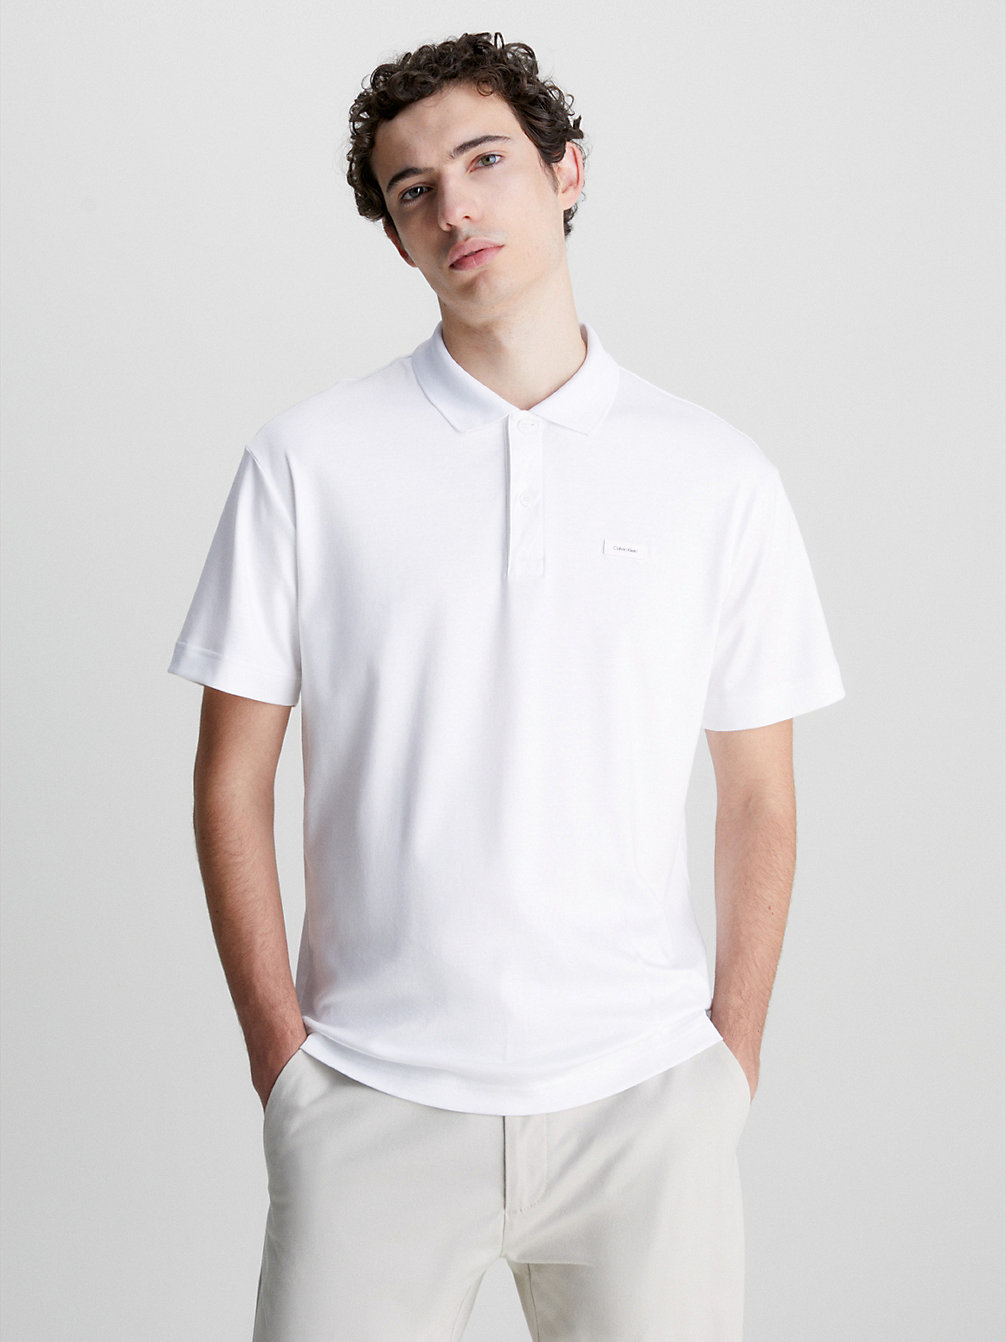 Polo Relaxed > BRIGHT WHITE > undefined hommes > Calvin Klein